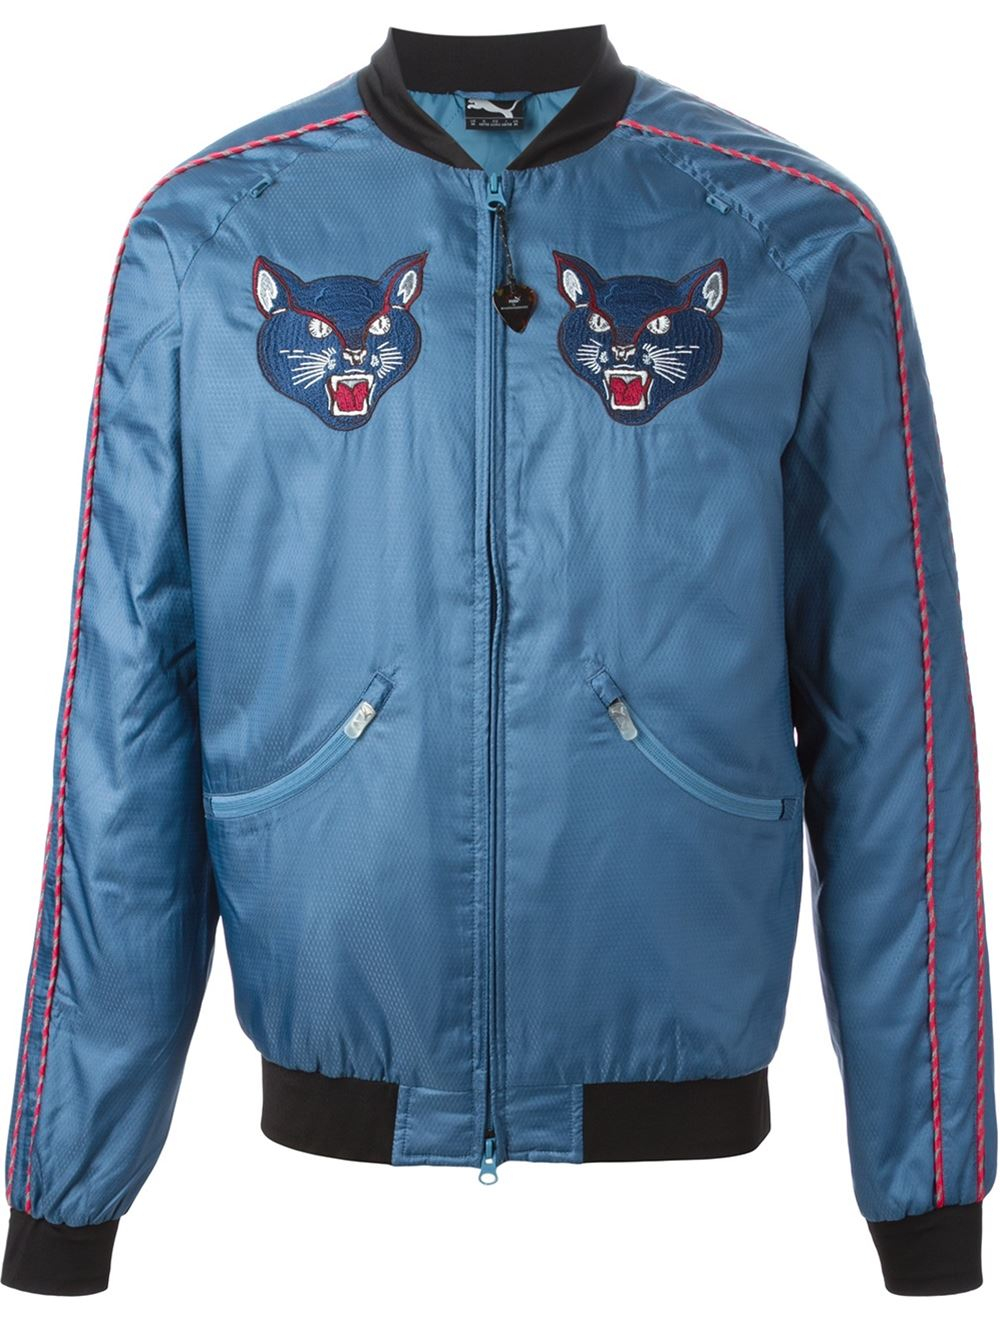 PUMA Cats Bomber Jacket in Blue for Men - Lyst